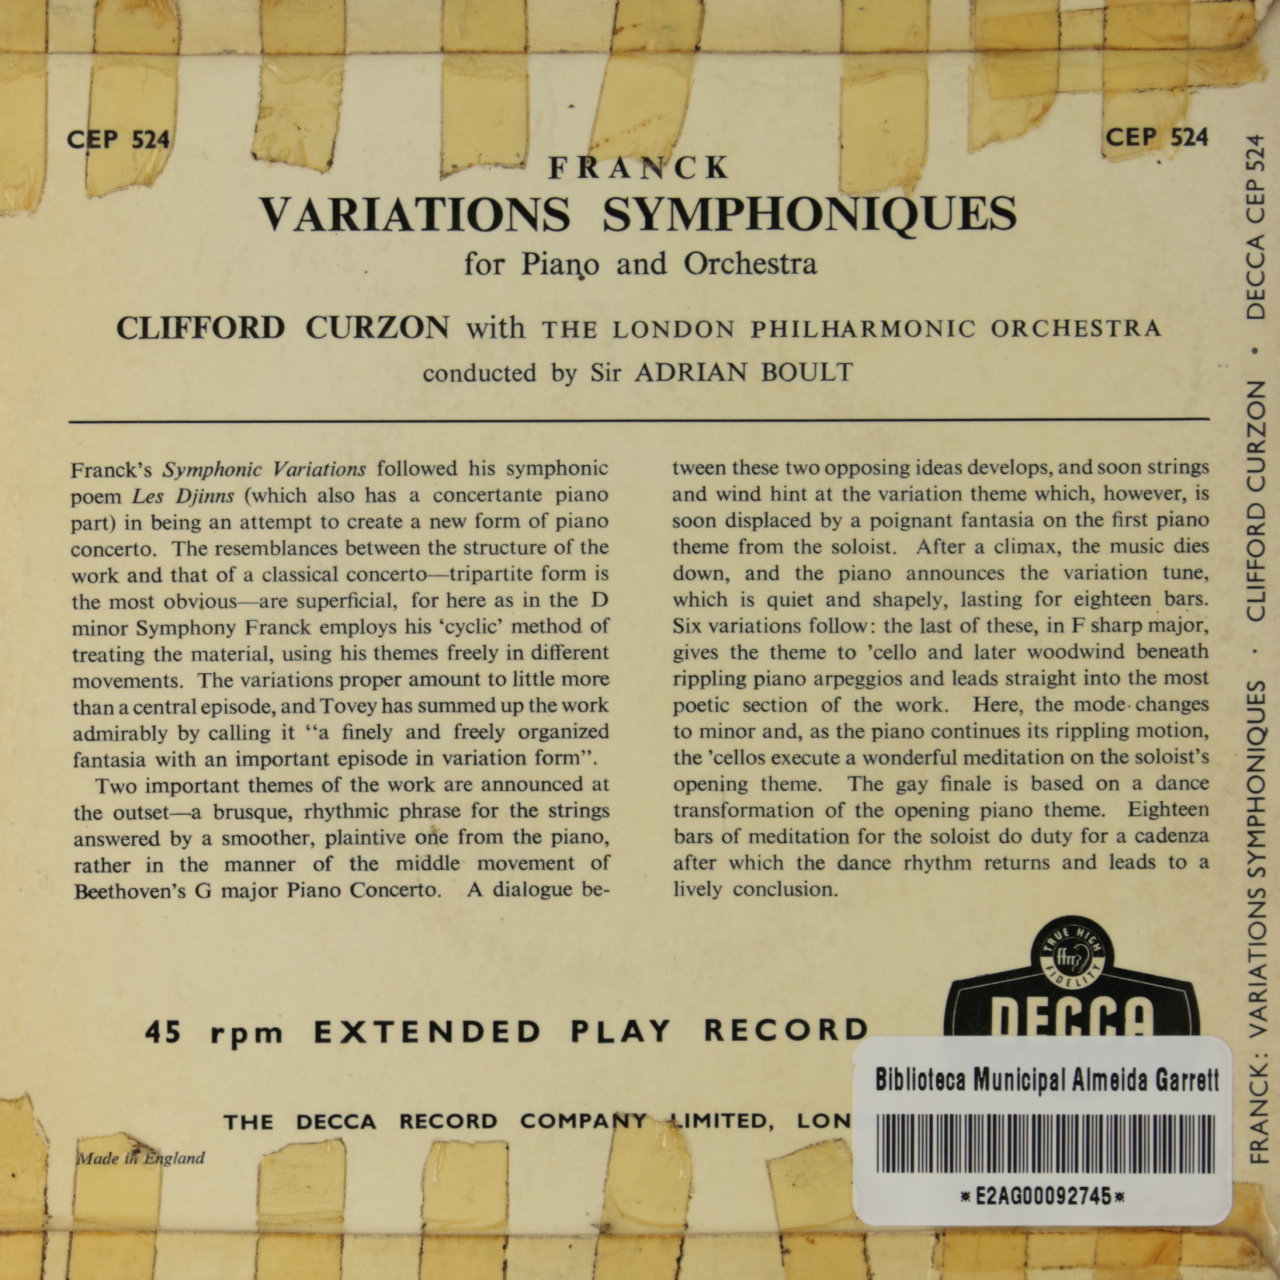 Franck: Variations Symphoniques for Piano and Orchestra